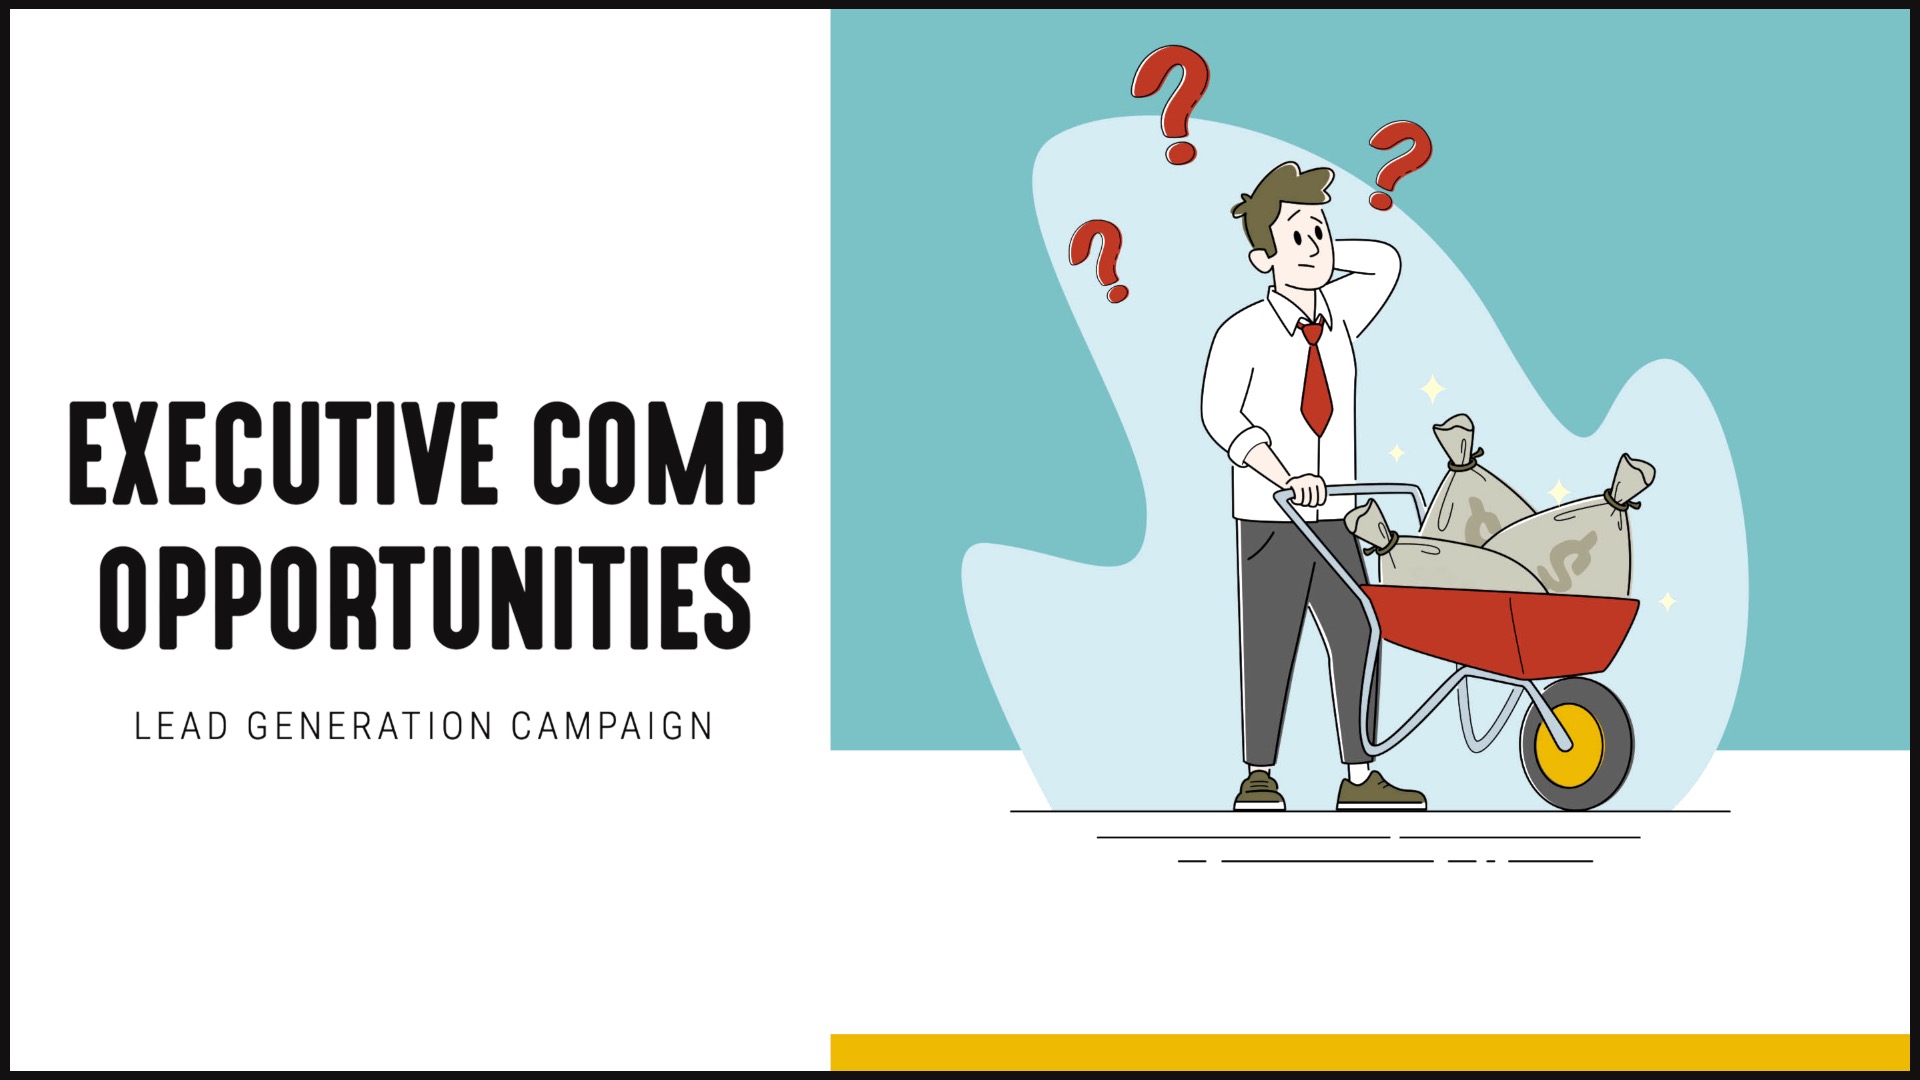 [NEW] Lead Gen Campaign | Executive Compensation Opportunities